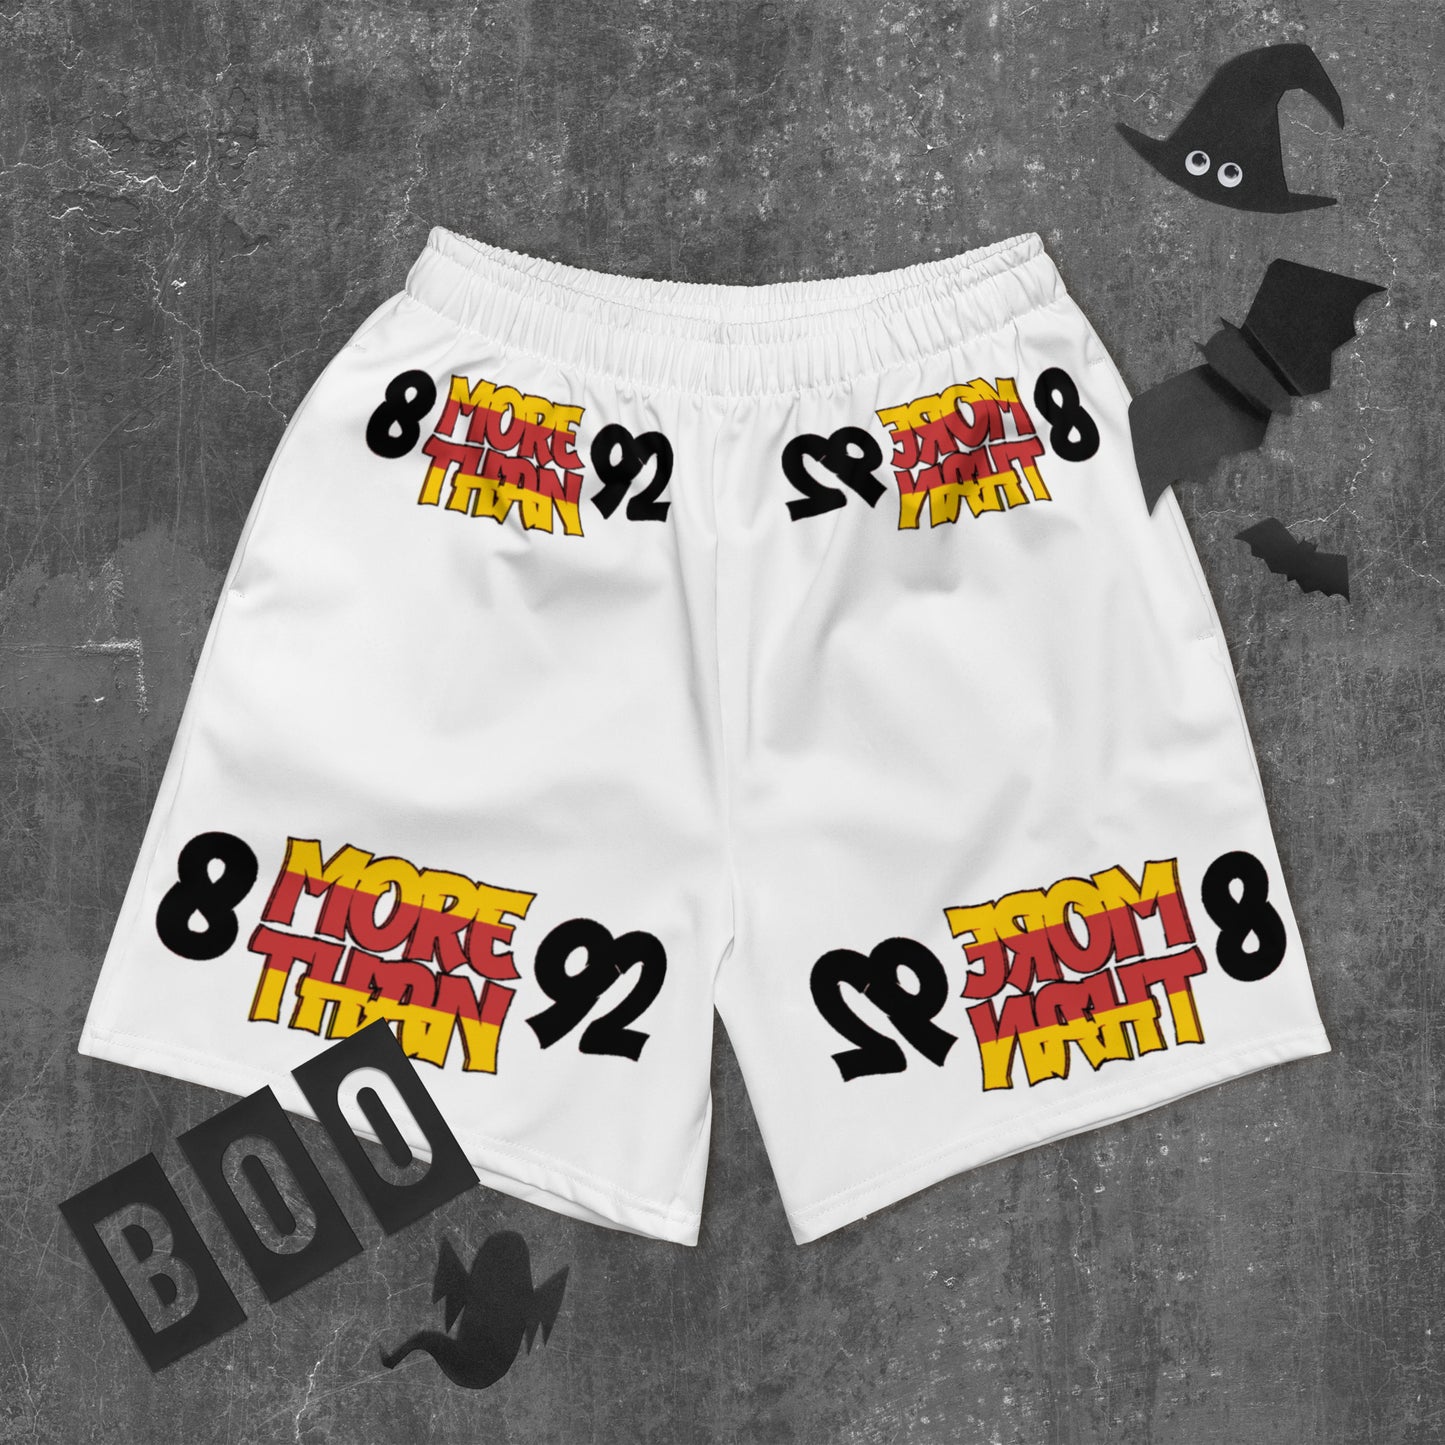 8 More Than 92 Men's  Athletic Shorts